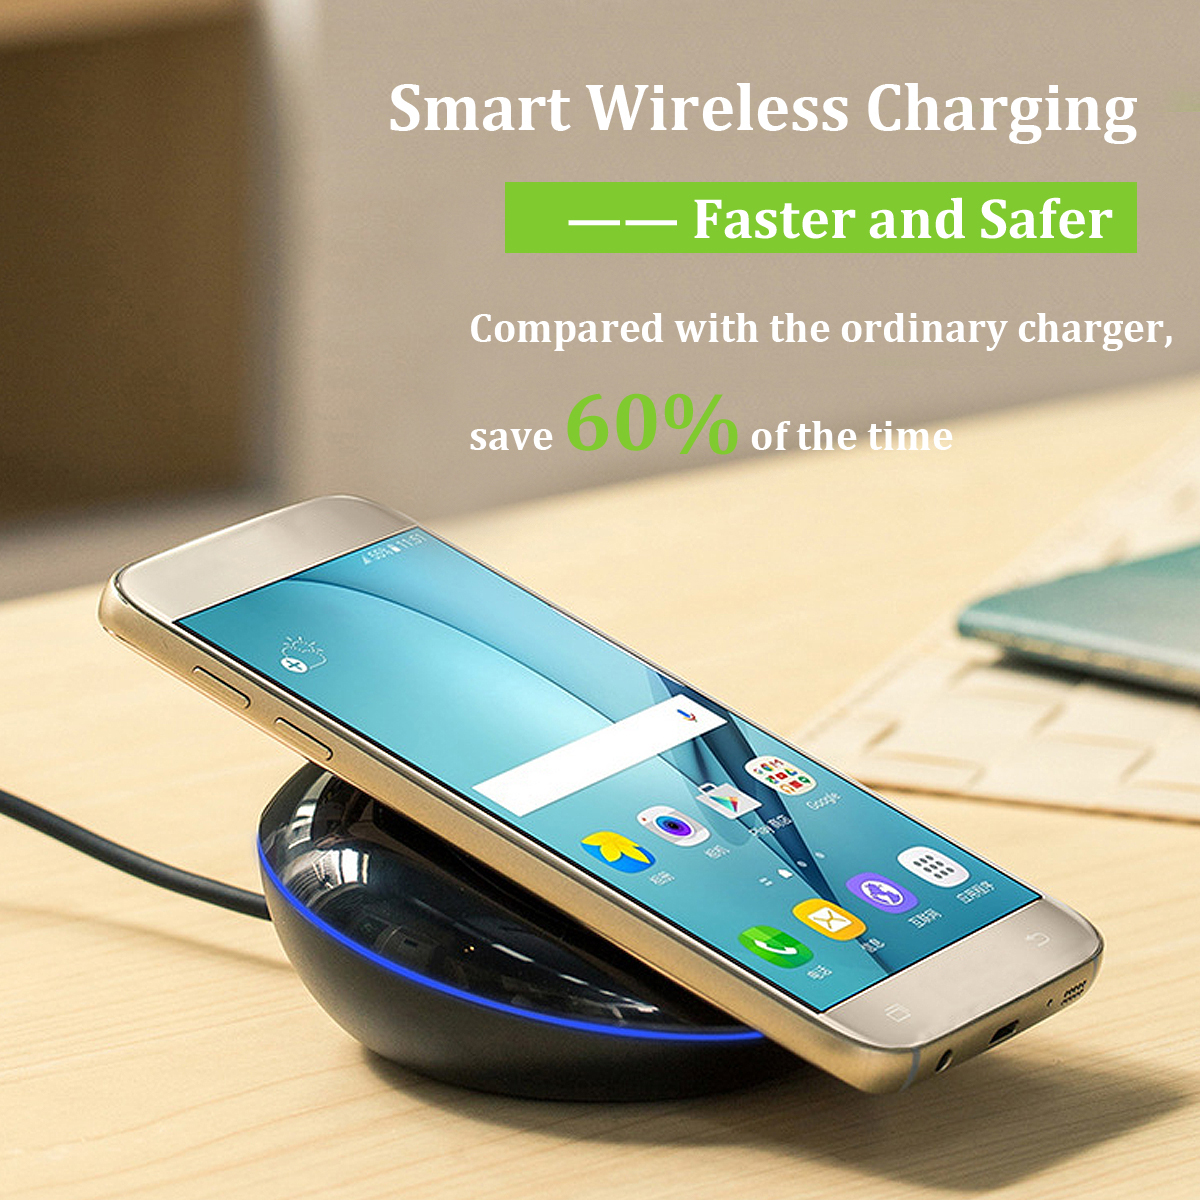 Bakeey-Qi-Wireless-Fast-Charger-With-LED-Indicator-For-iPhone-X-8Plus-Samsung-S7-S8-Note-8-1217829-1